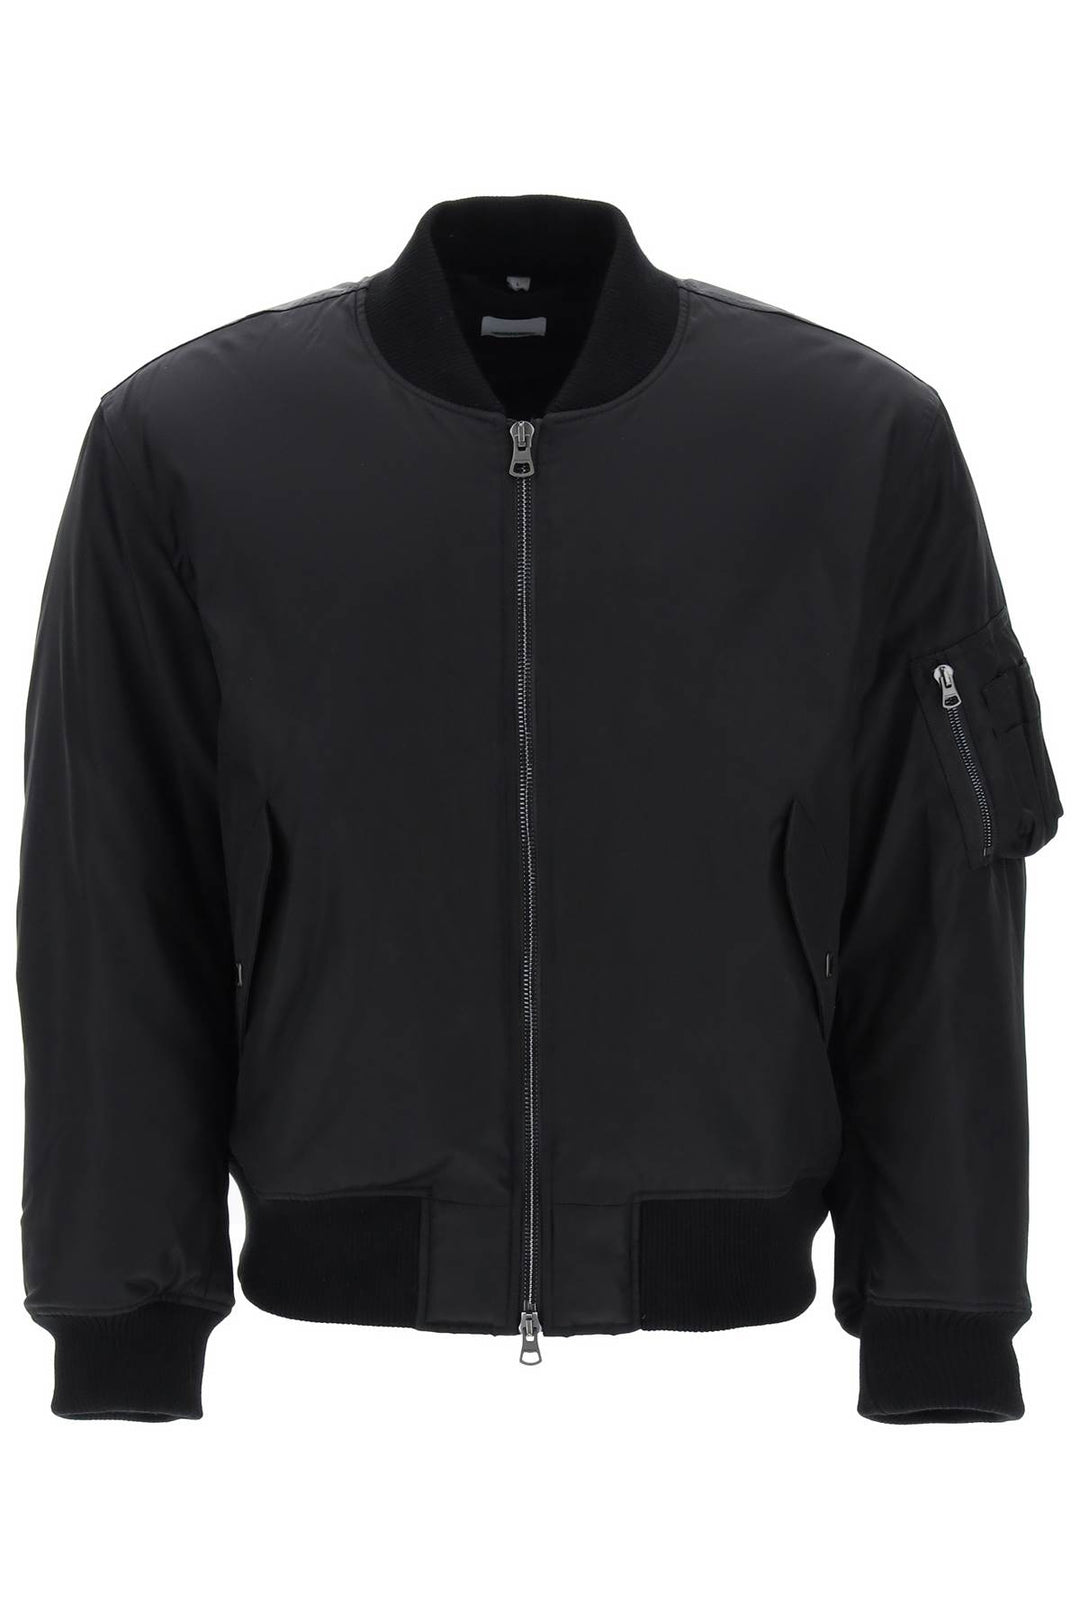 Burberry 'Graves' Padded Bomber Jacket With Back Emblem Embroidery   Black